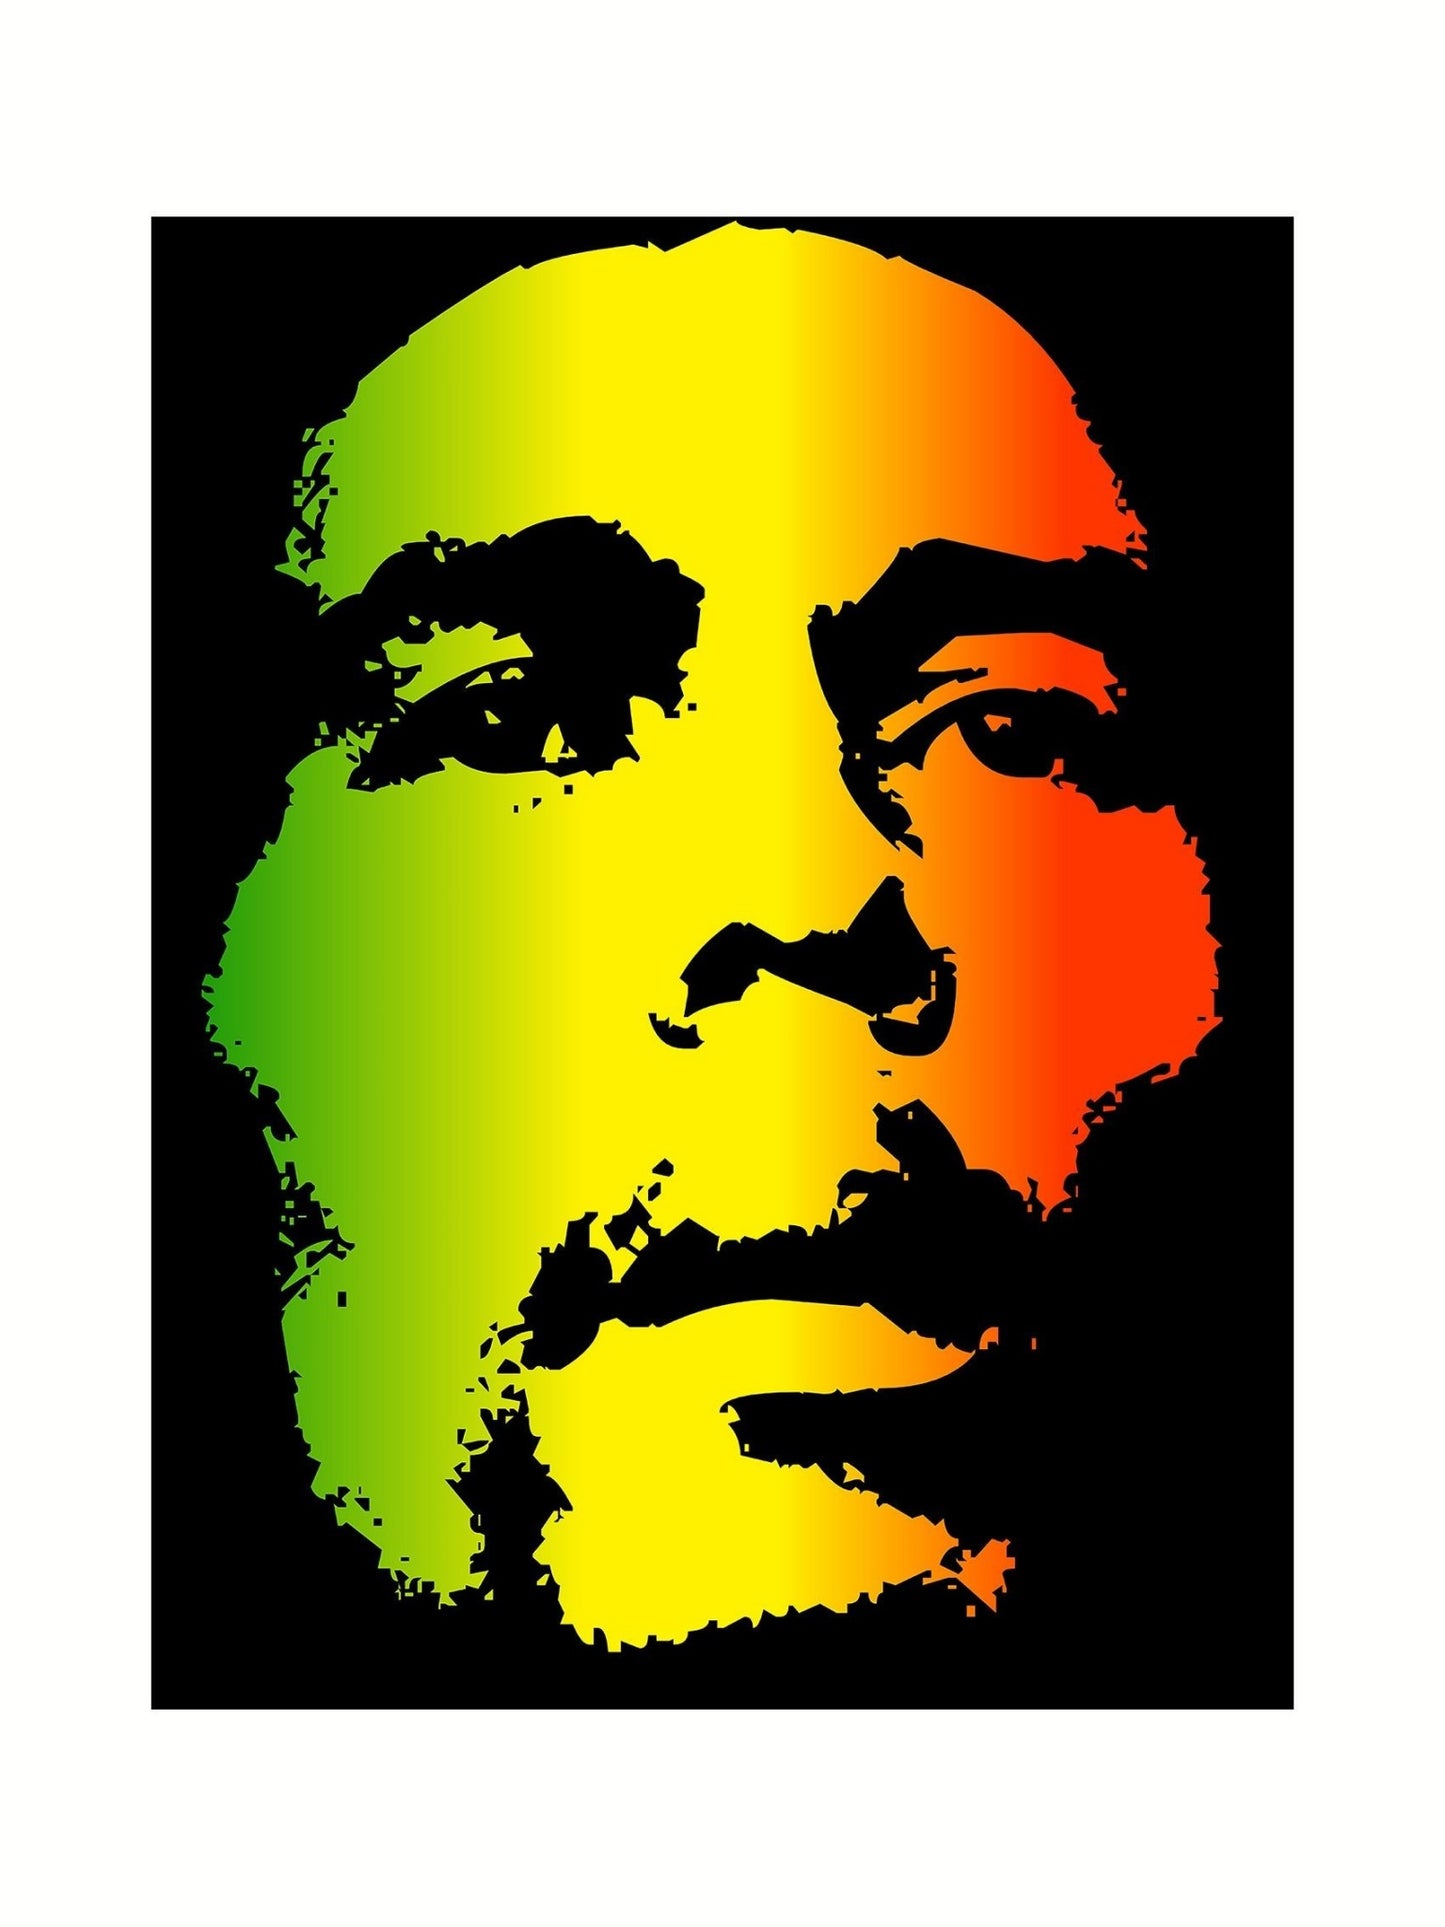 Bob Marley - His Face in Jamaican Flag Colours, Print